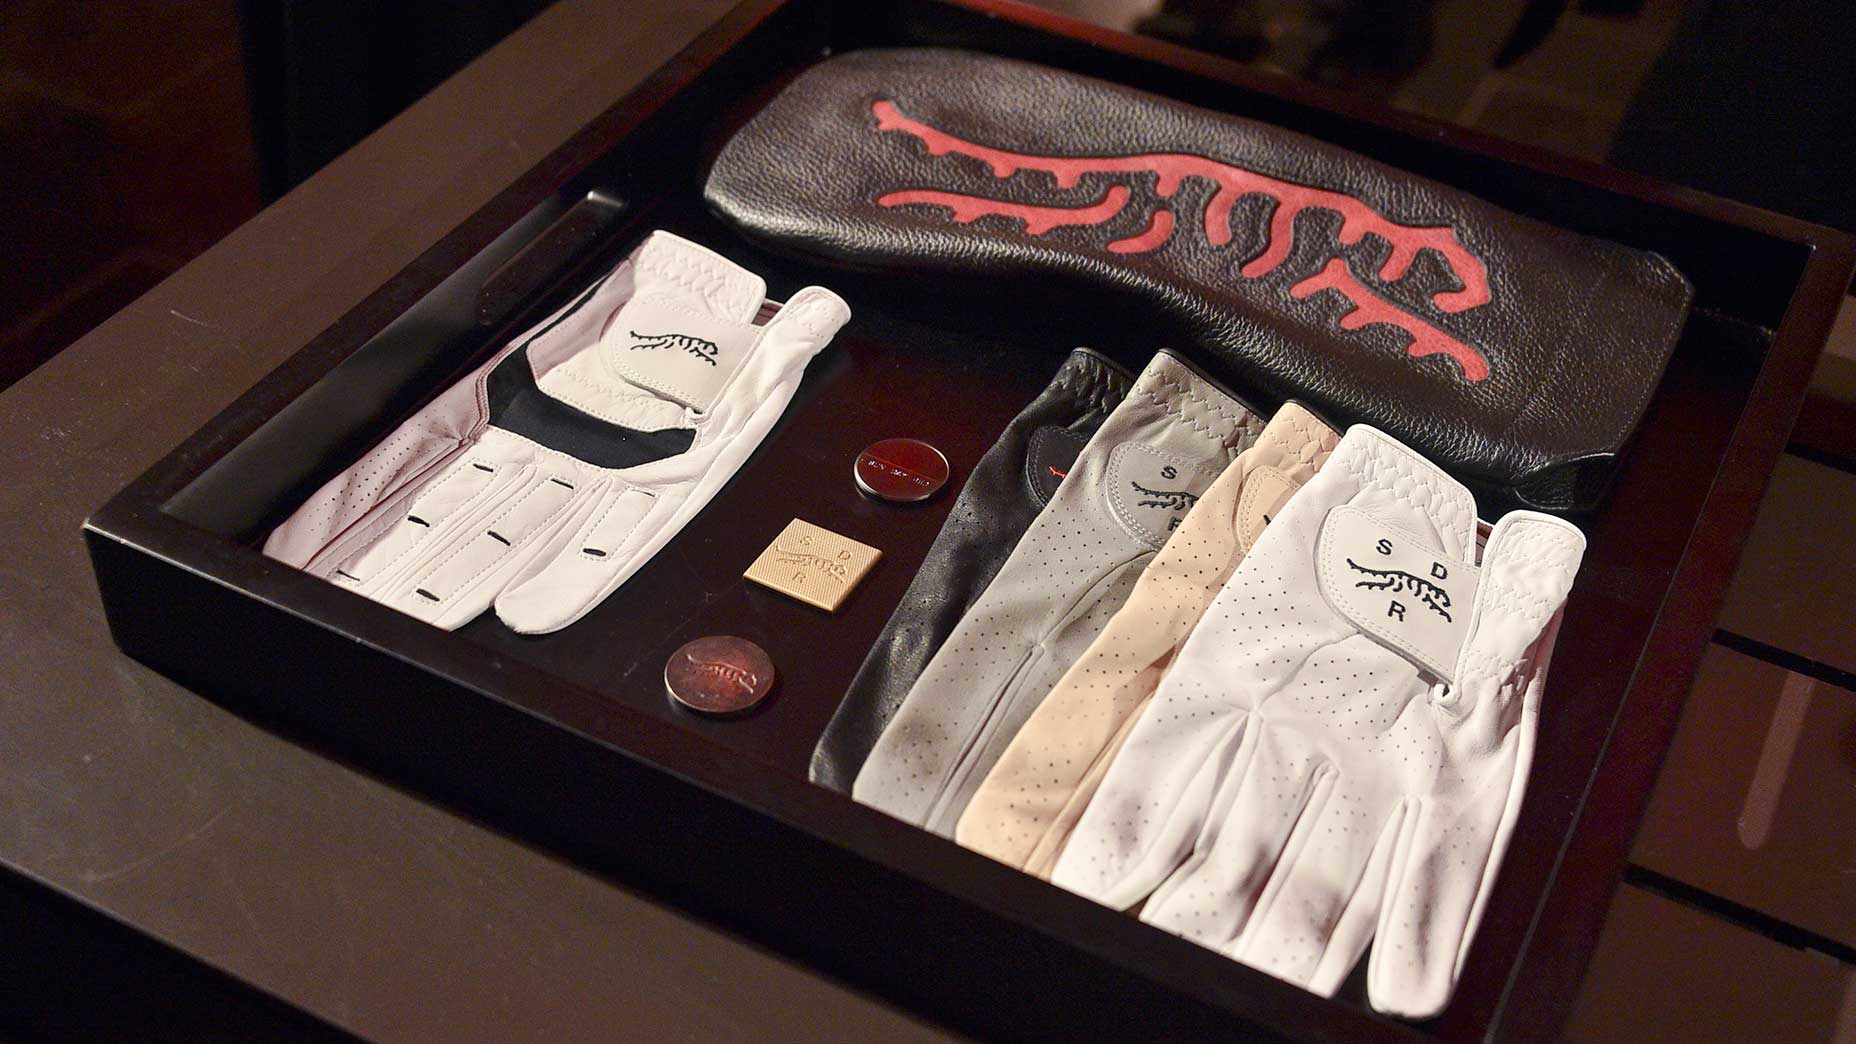 tiger woods' sun day red gloves and gear